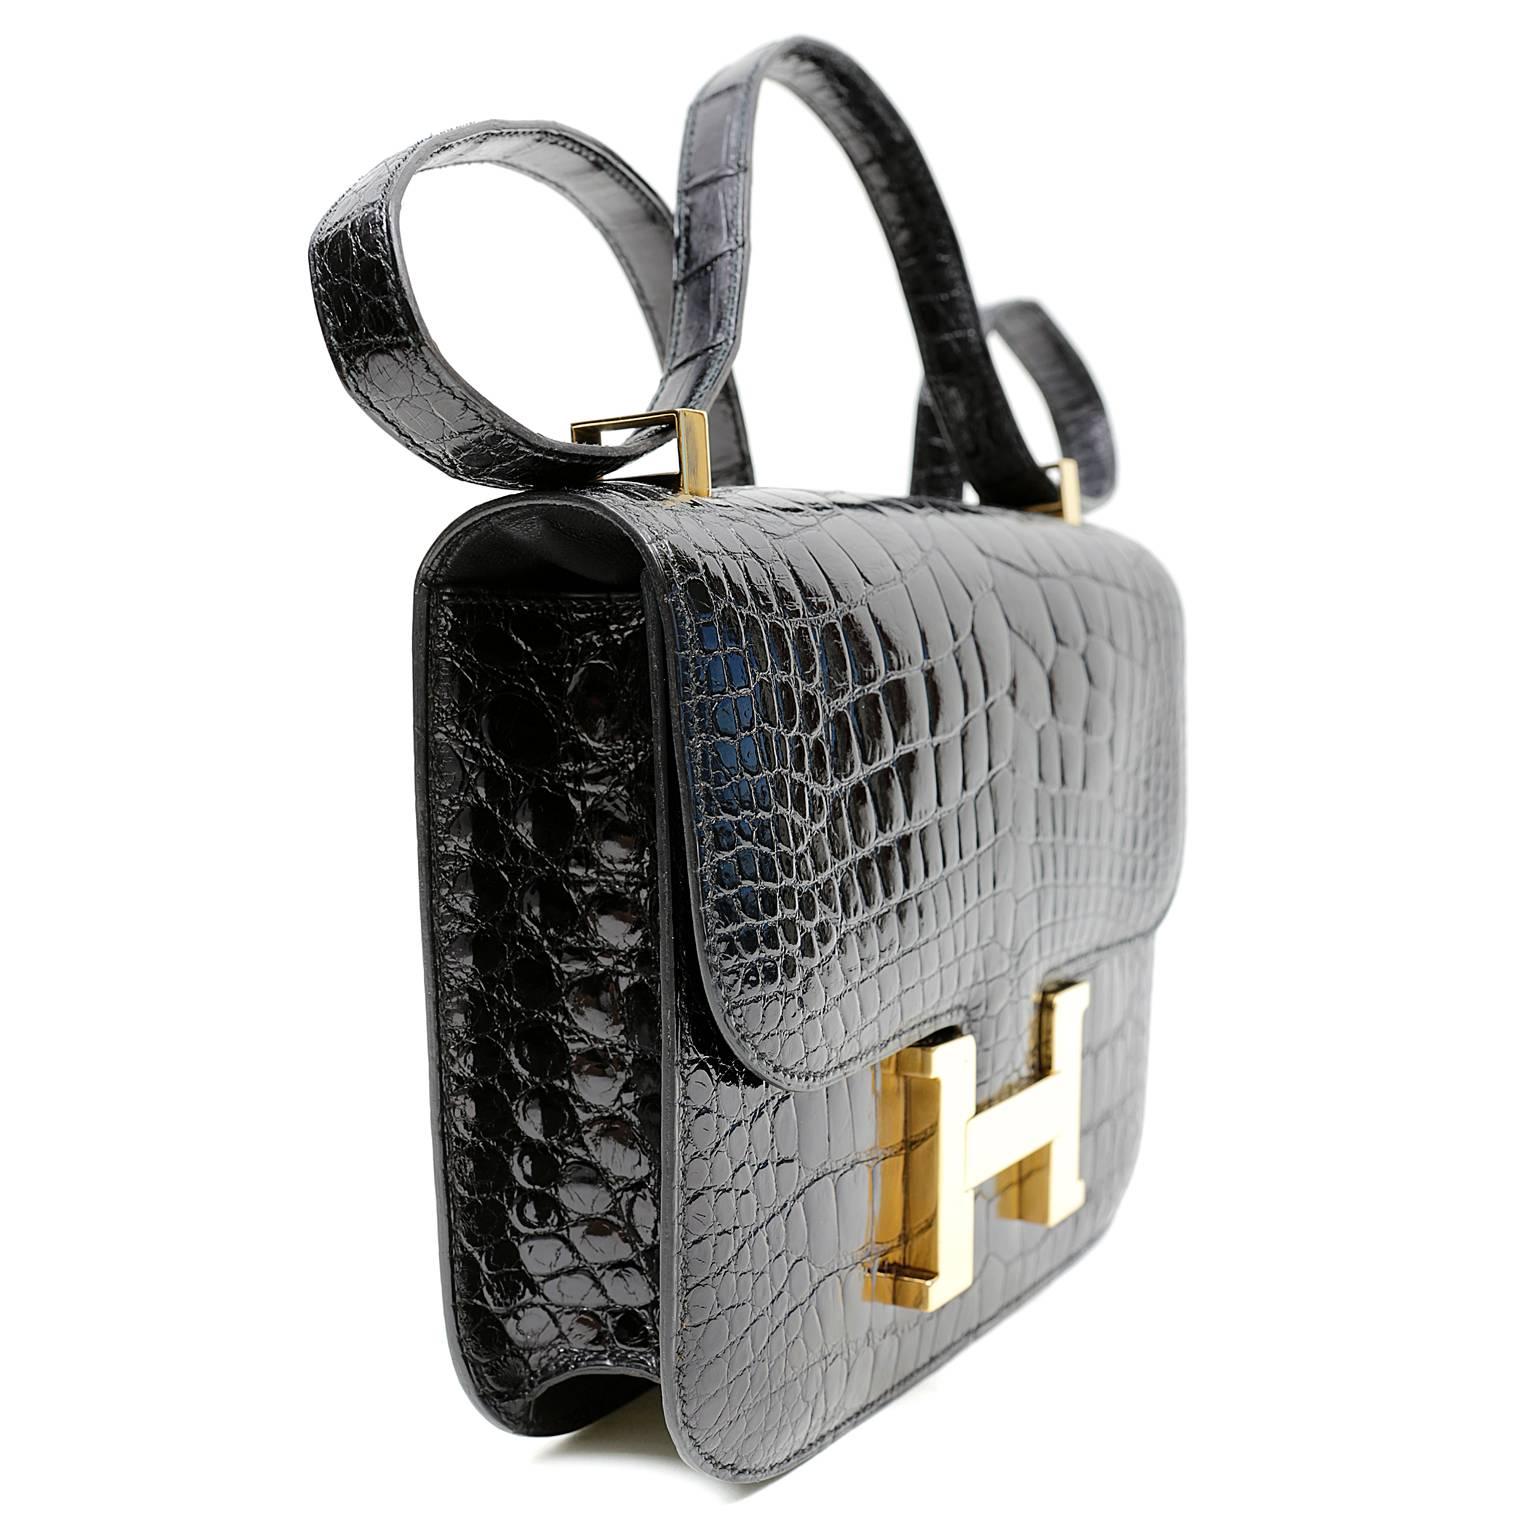 Hermès Black Alligator Constance- PRISTINE
 A truly classic Hermès style, Jackie Onassis was often photographed wearing one of the many Constance bags in her personal collection.  The exotic versions are naturally very rare and considered highly